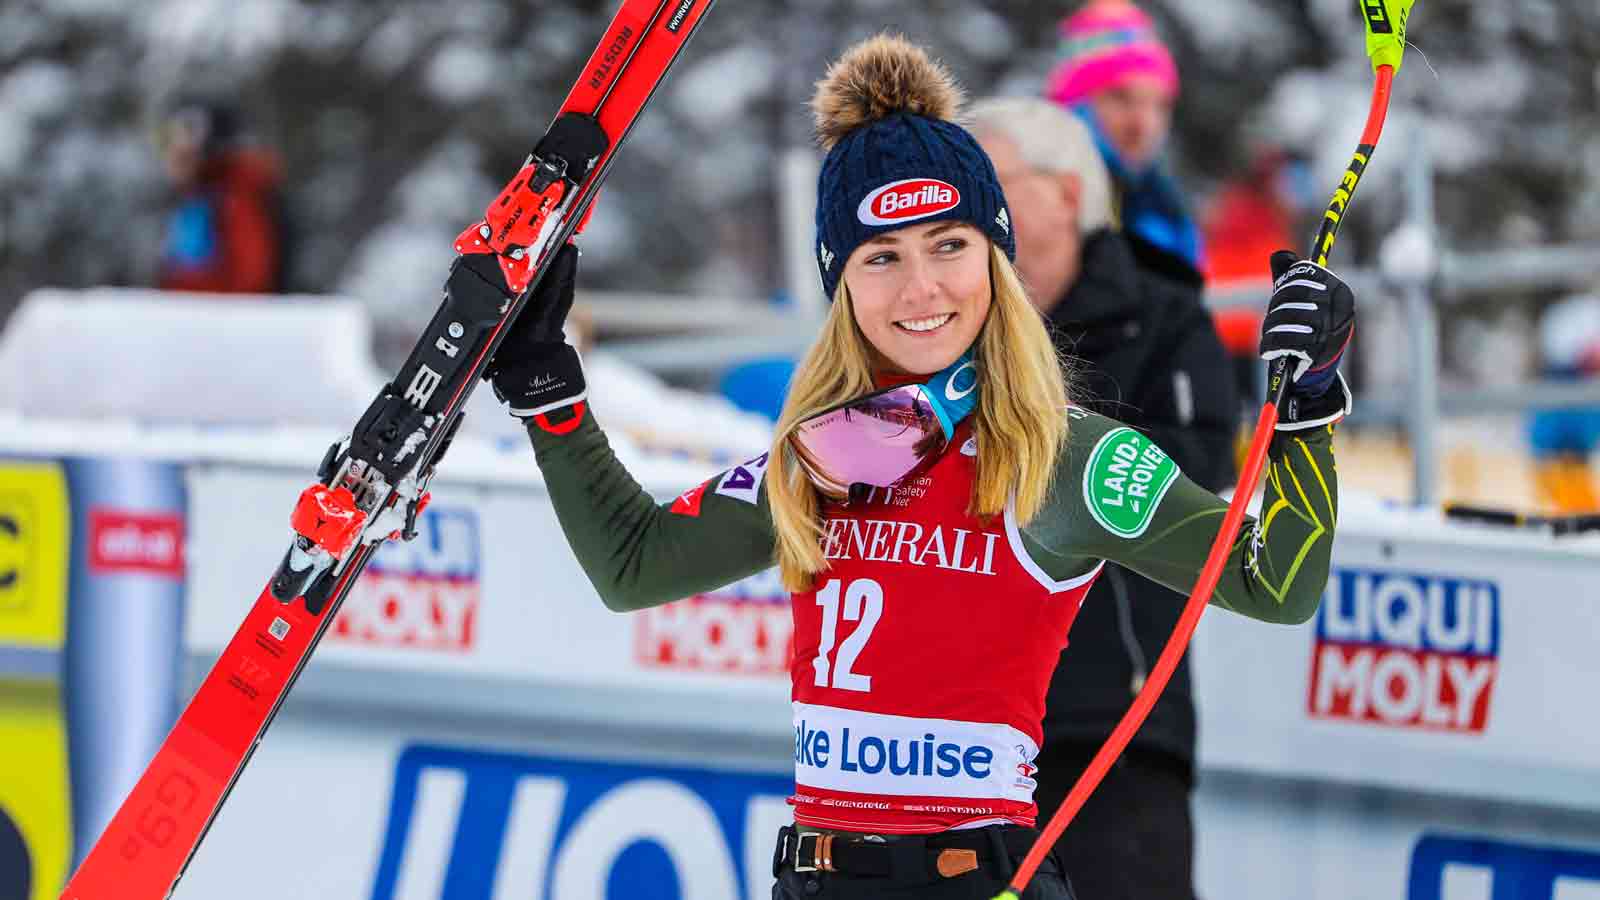 5 Things to Know About Mikaela Shiffrin